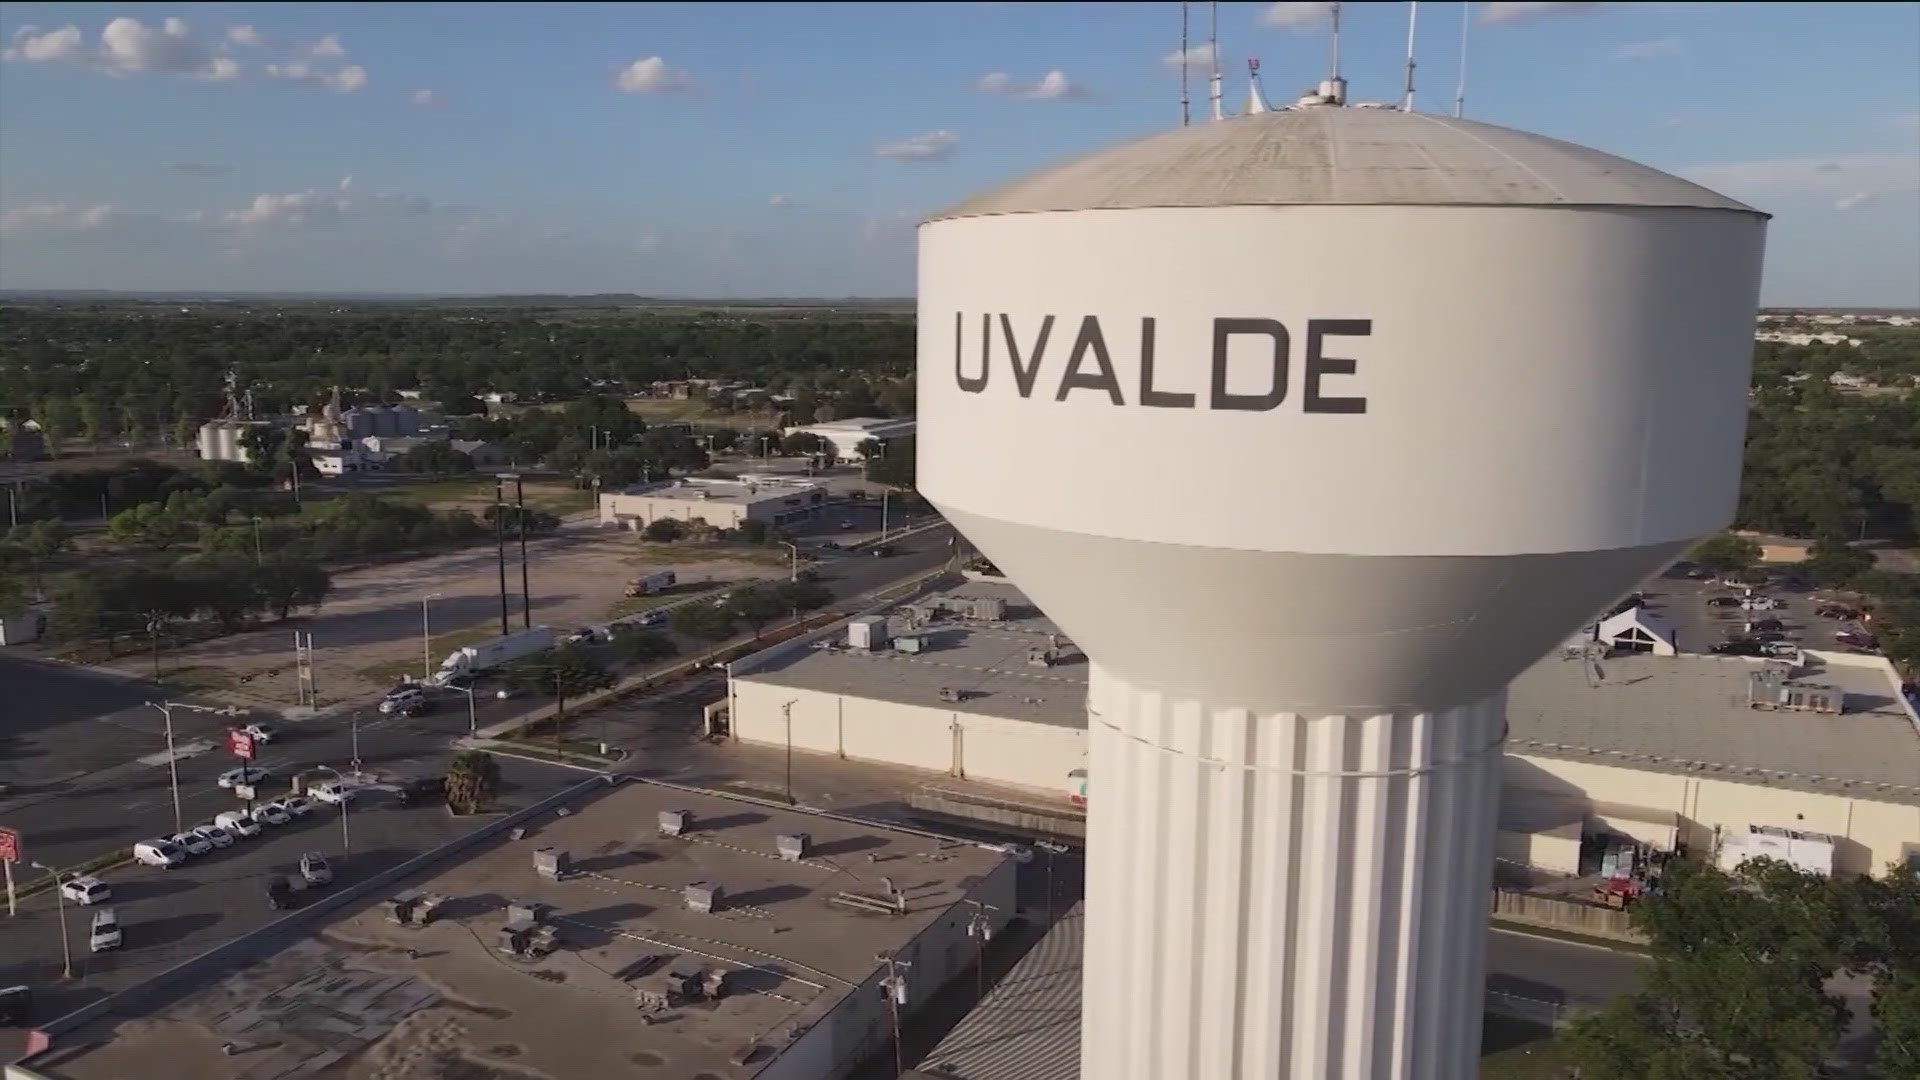 Uvalde's mayor recently announced his resignation. Family members continue to protest in the response to the 2022 shooting at Robb Elementary School.